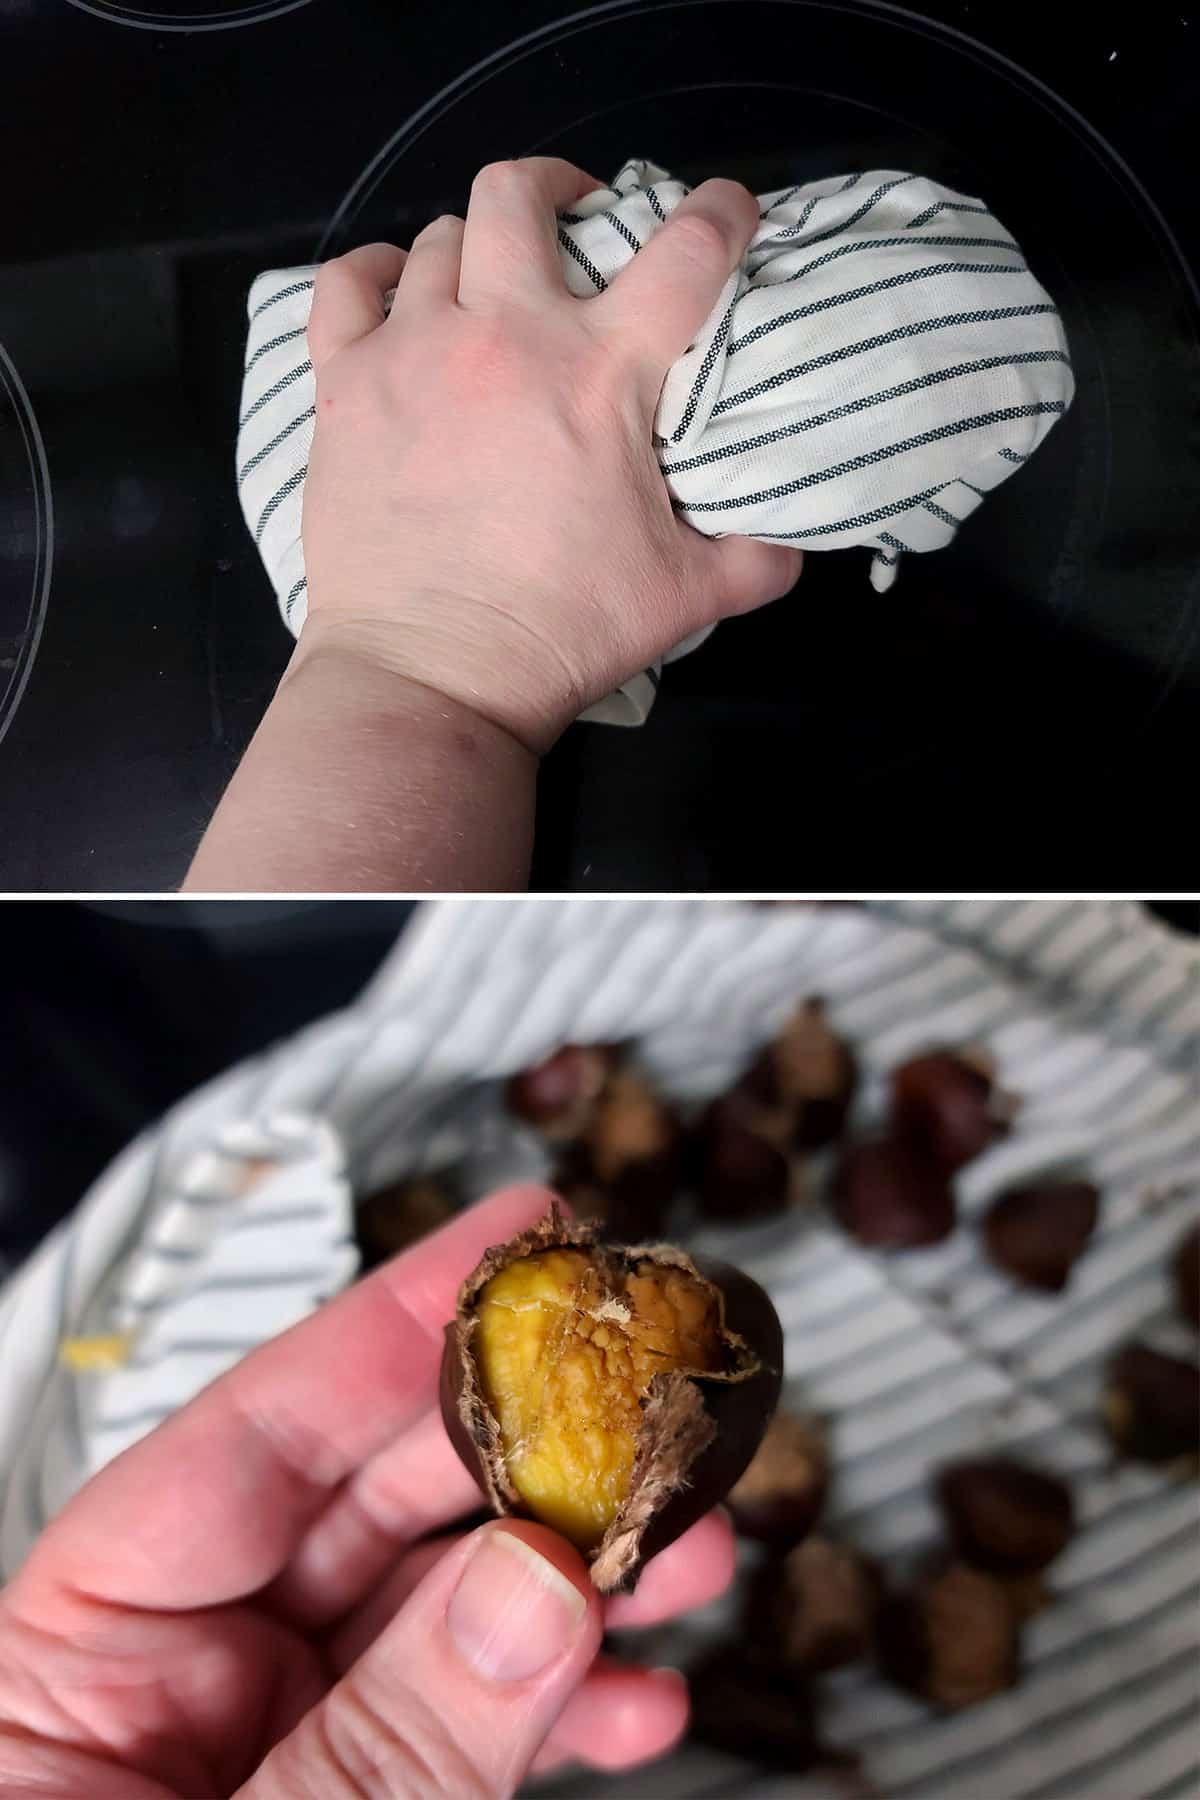 A 2 part image showing showing a hand squeezing the wrapped chestnuts, then holding a half peeled roasted chestnut.